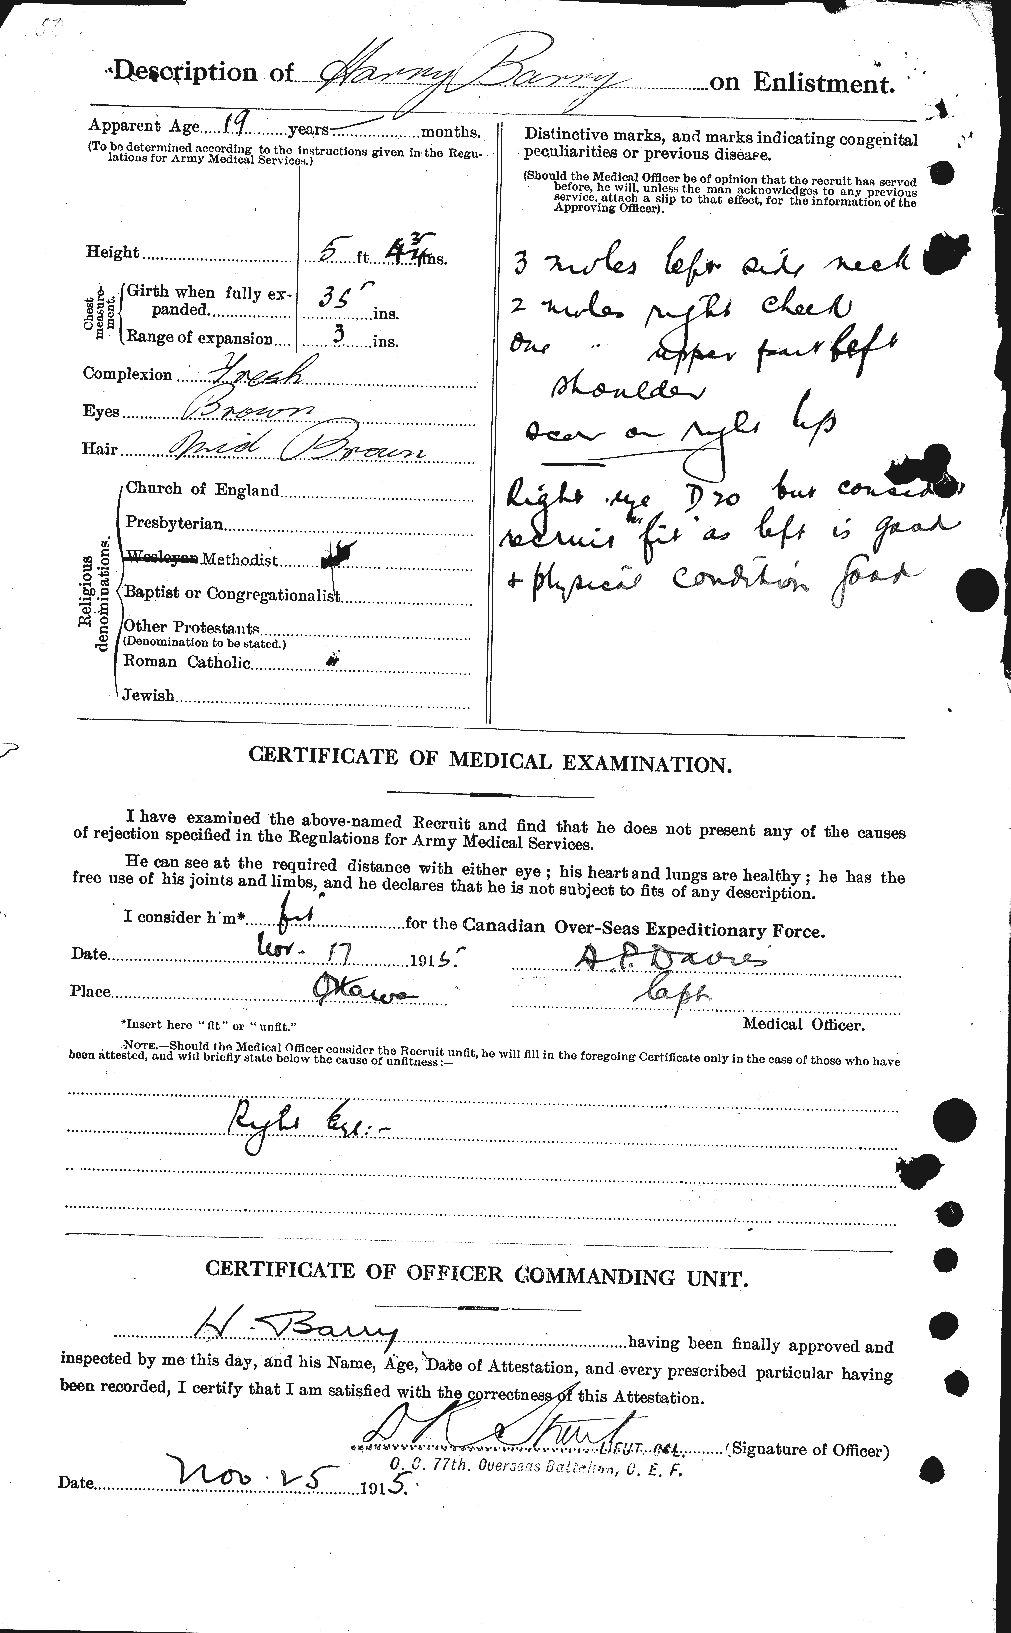 Personnel Records of the First World War - CEF 222162b